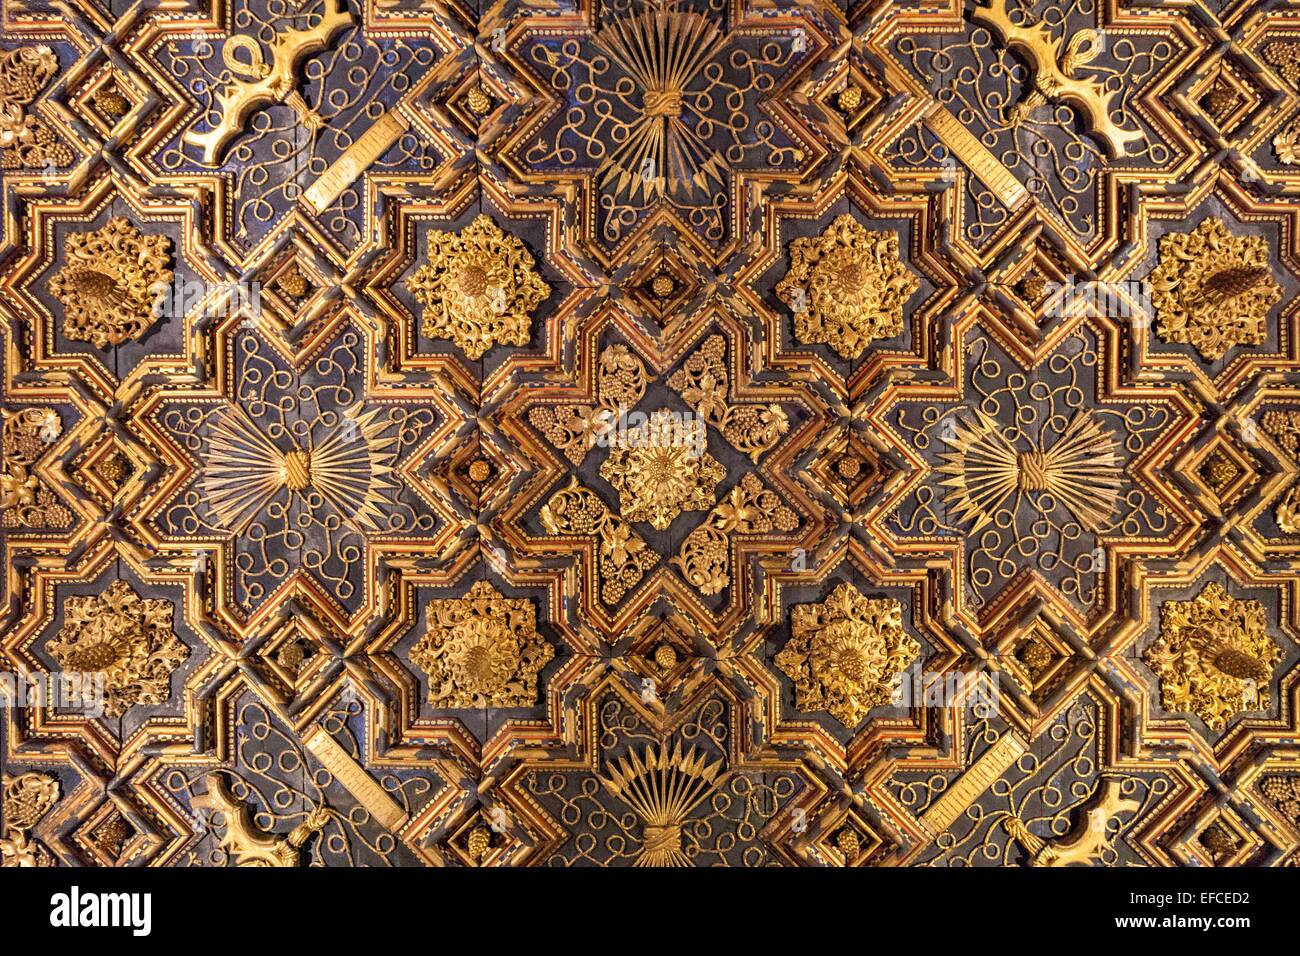 Elaborate abstract geometric Islamic pattern decorating the ceiling of the Aljaferia Place in Zaragoza Spain. Stock Photo